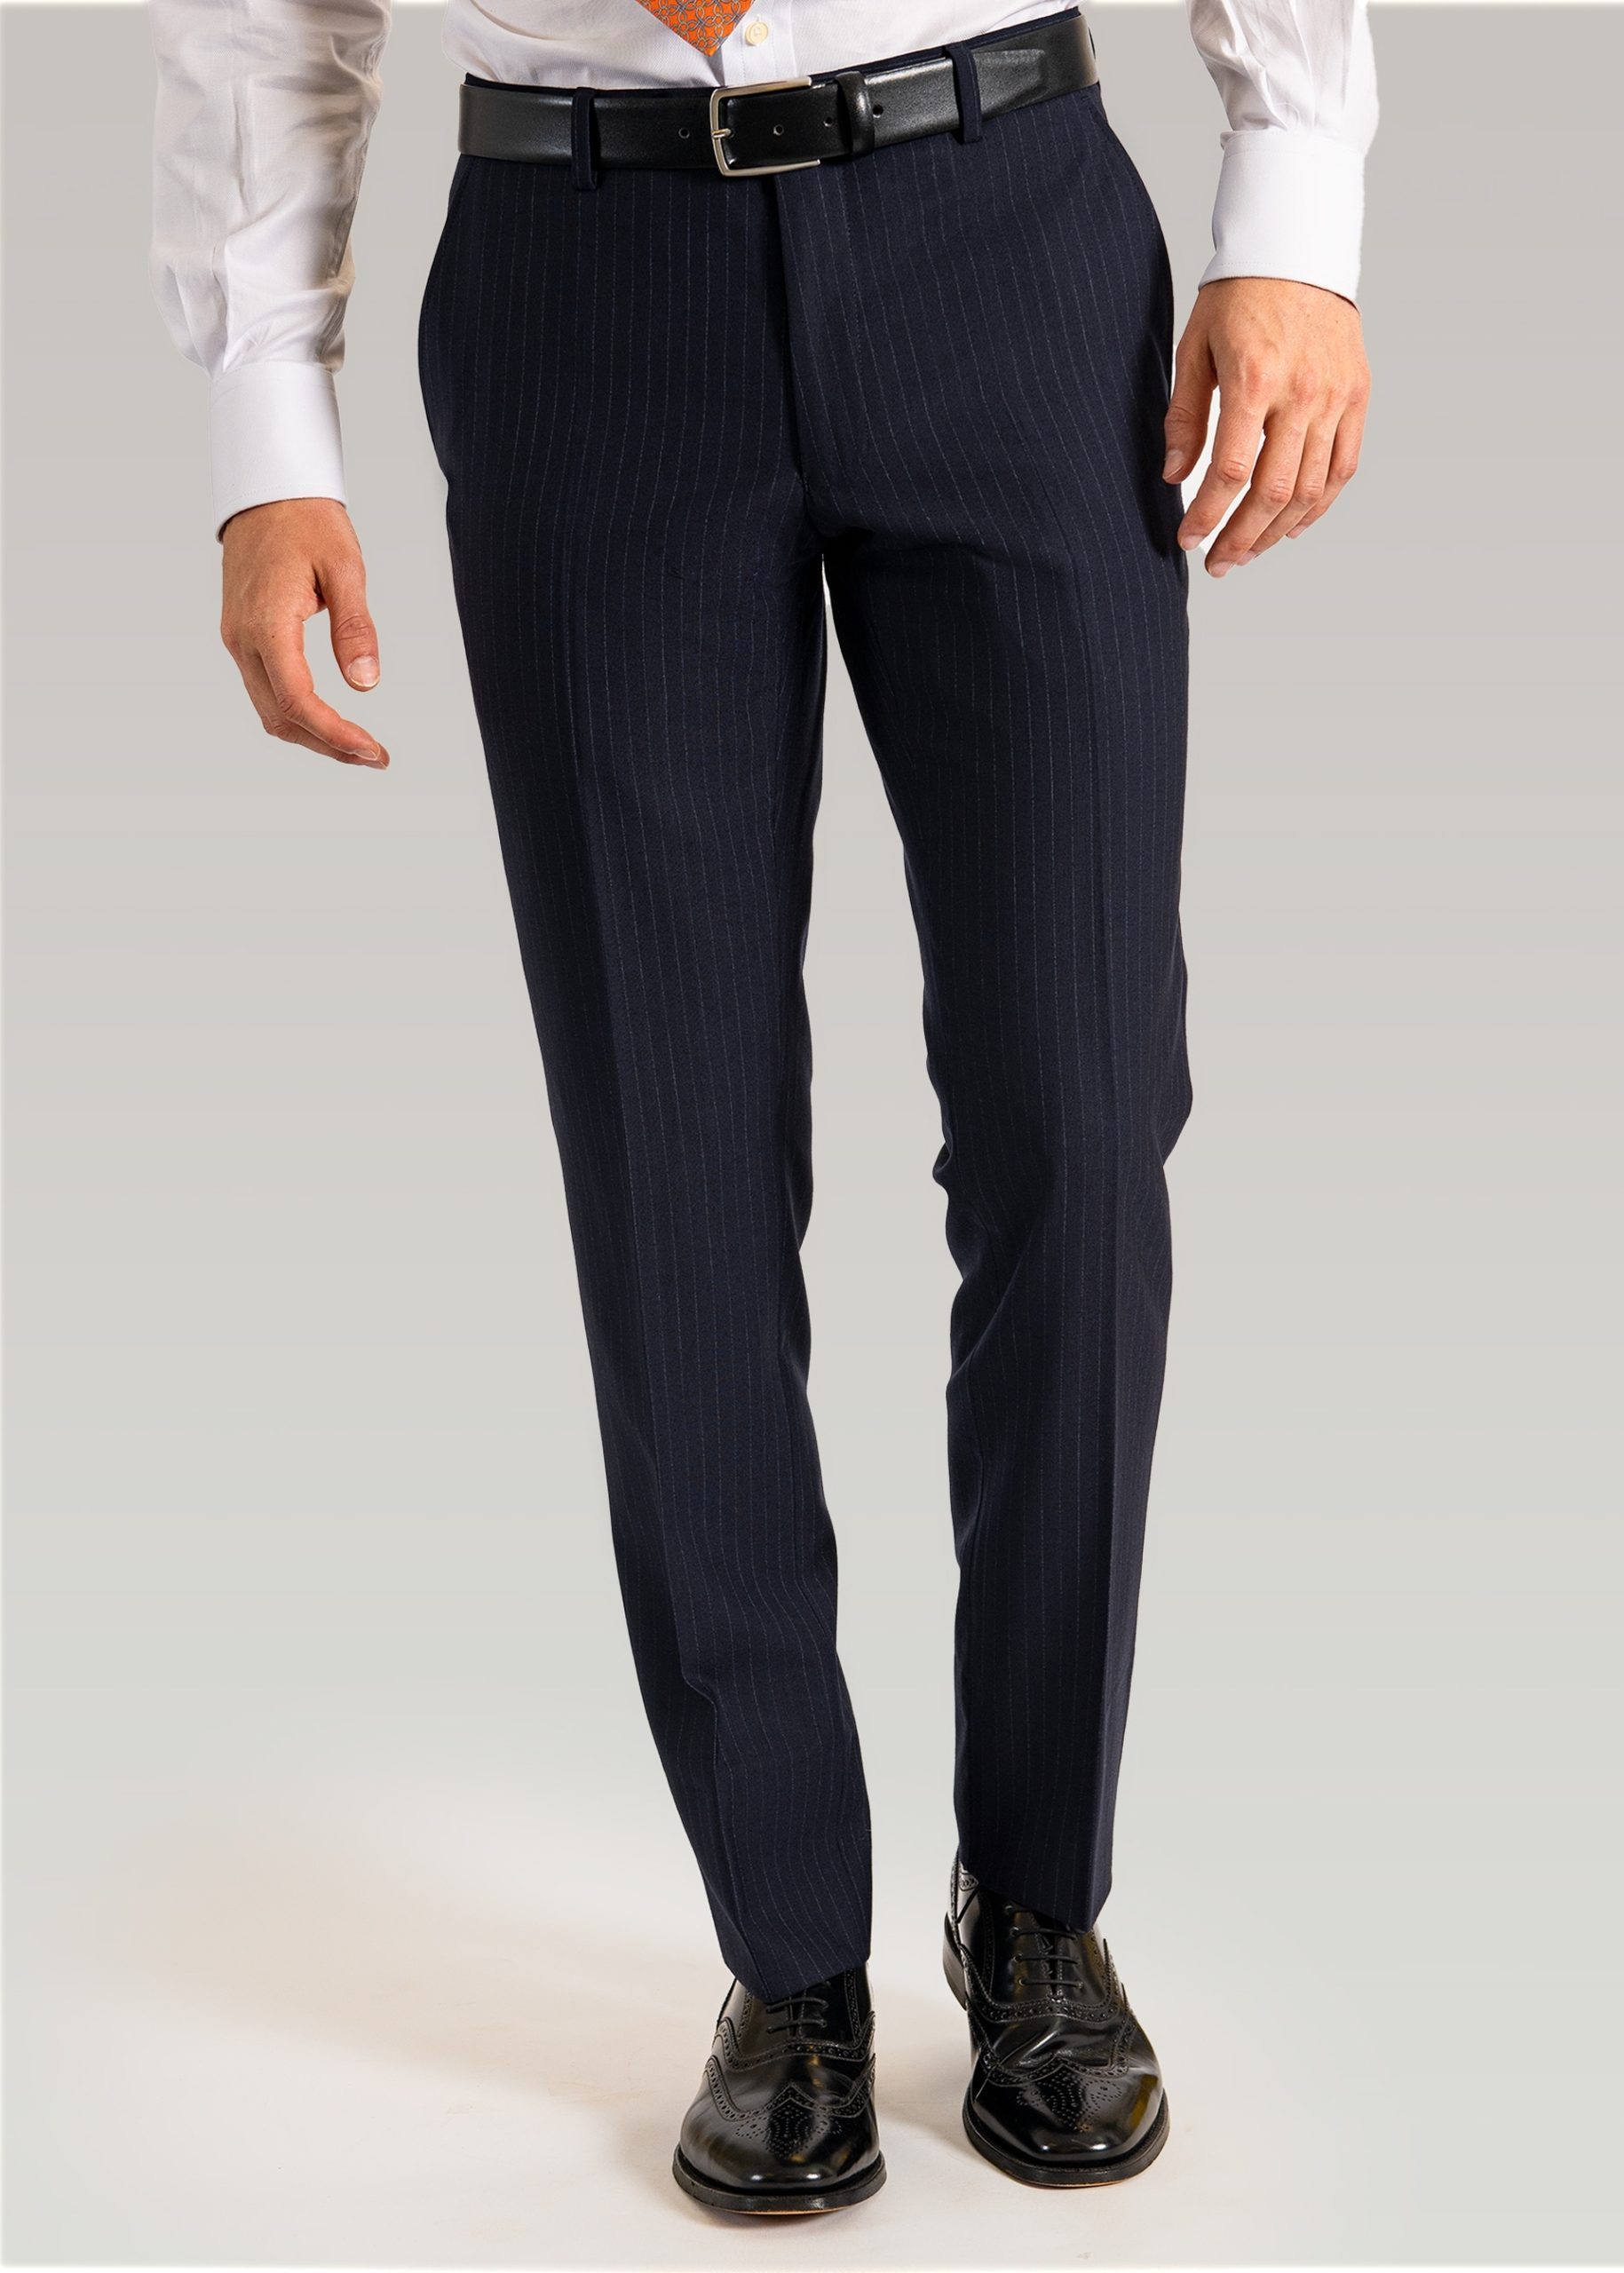 Navy striped suit trousers with black leather belt